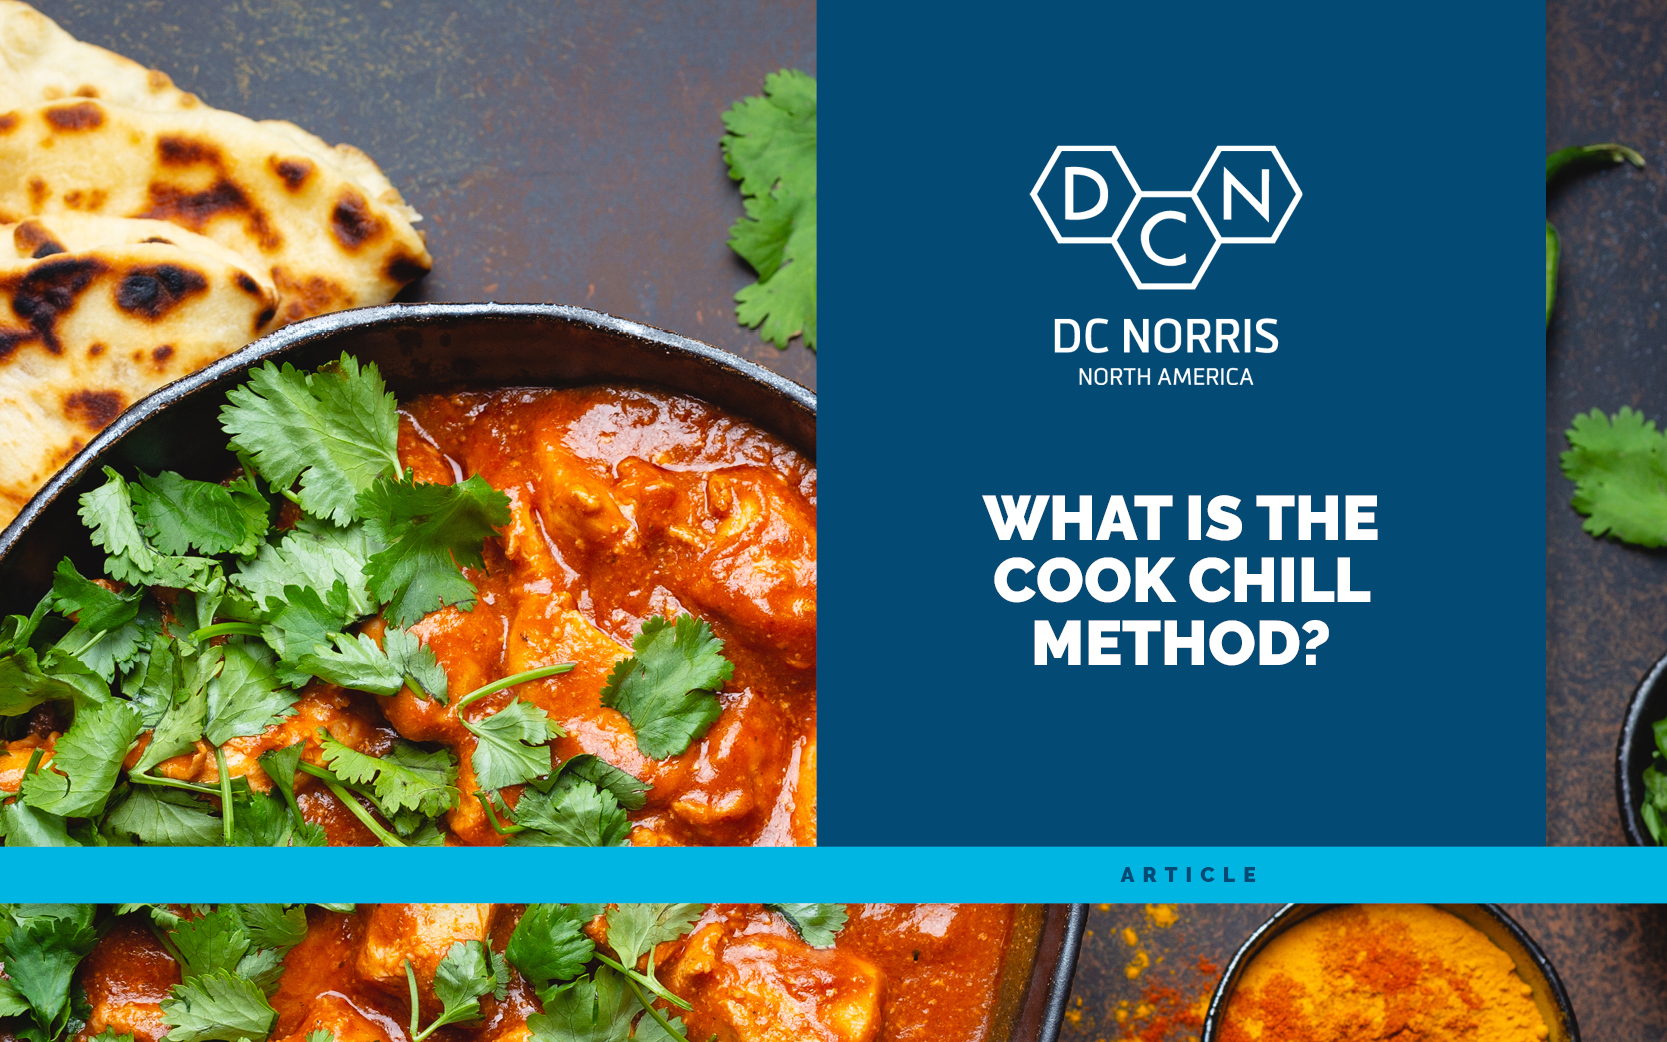 a bowl of curry prepared using the cook chill method next to a blue banner that reads "What is the Cook Chill method" and links to the DC Norris North America blog post